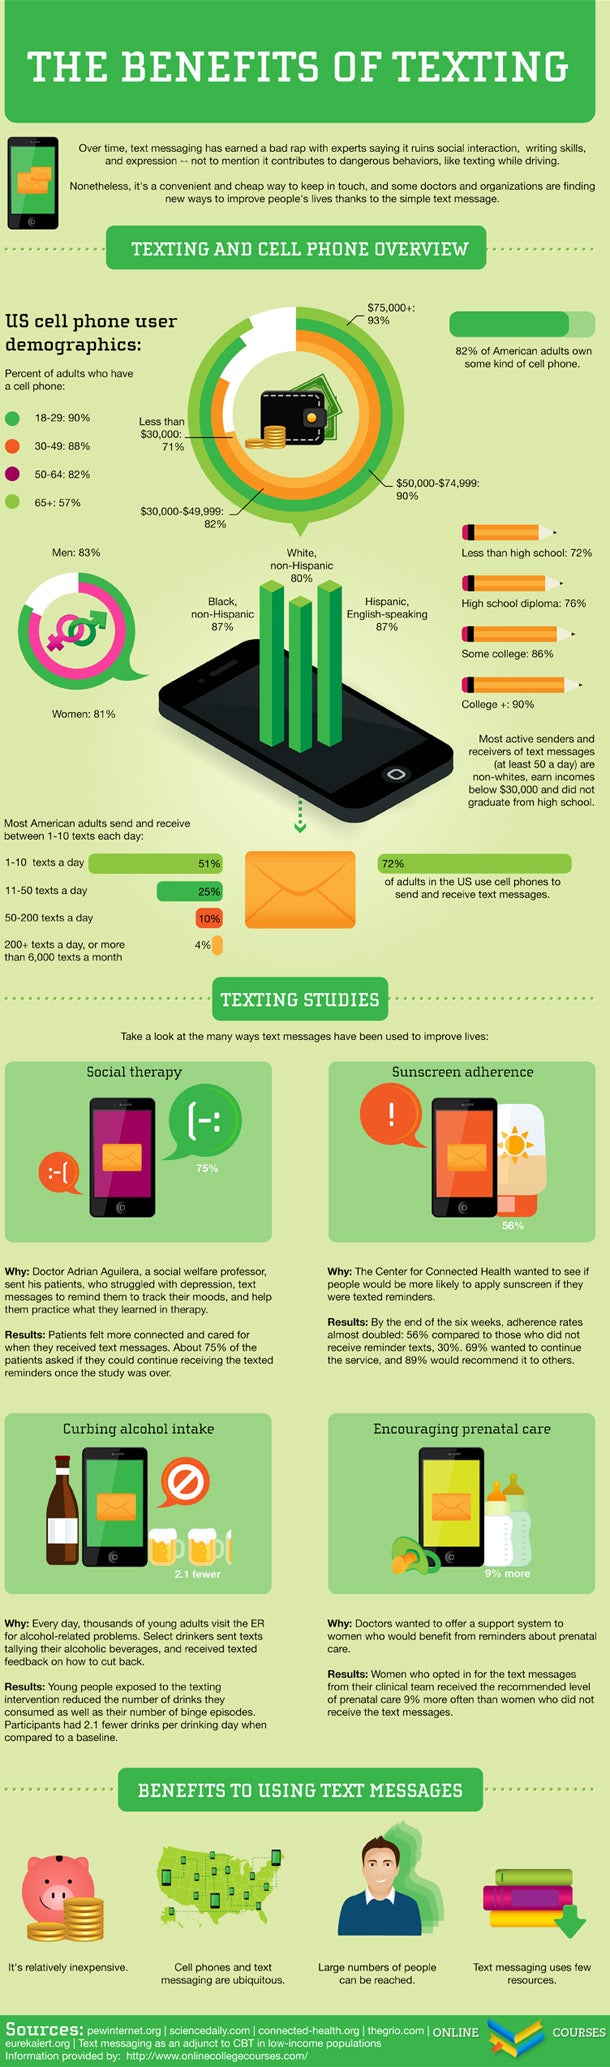 Texting has tons of benefits as well: infographic